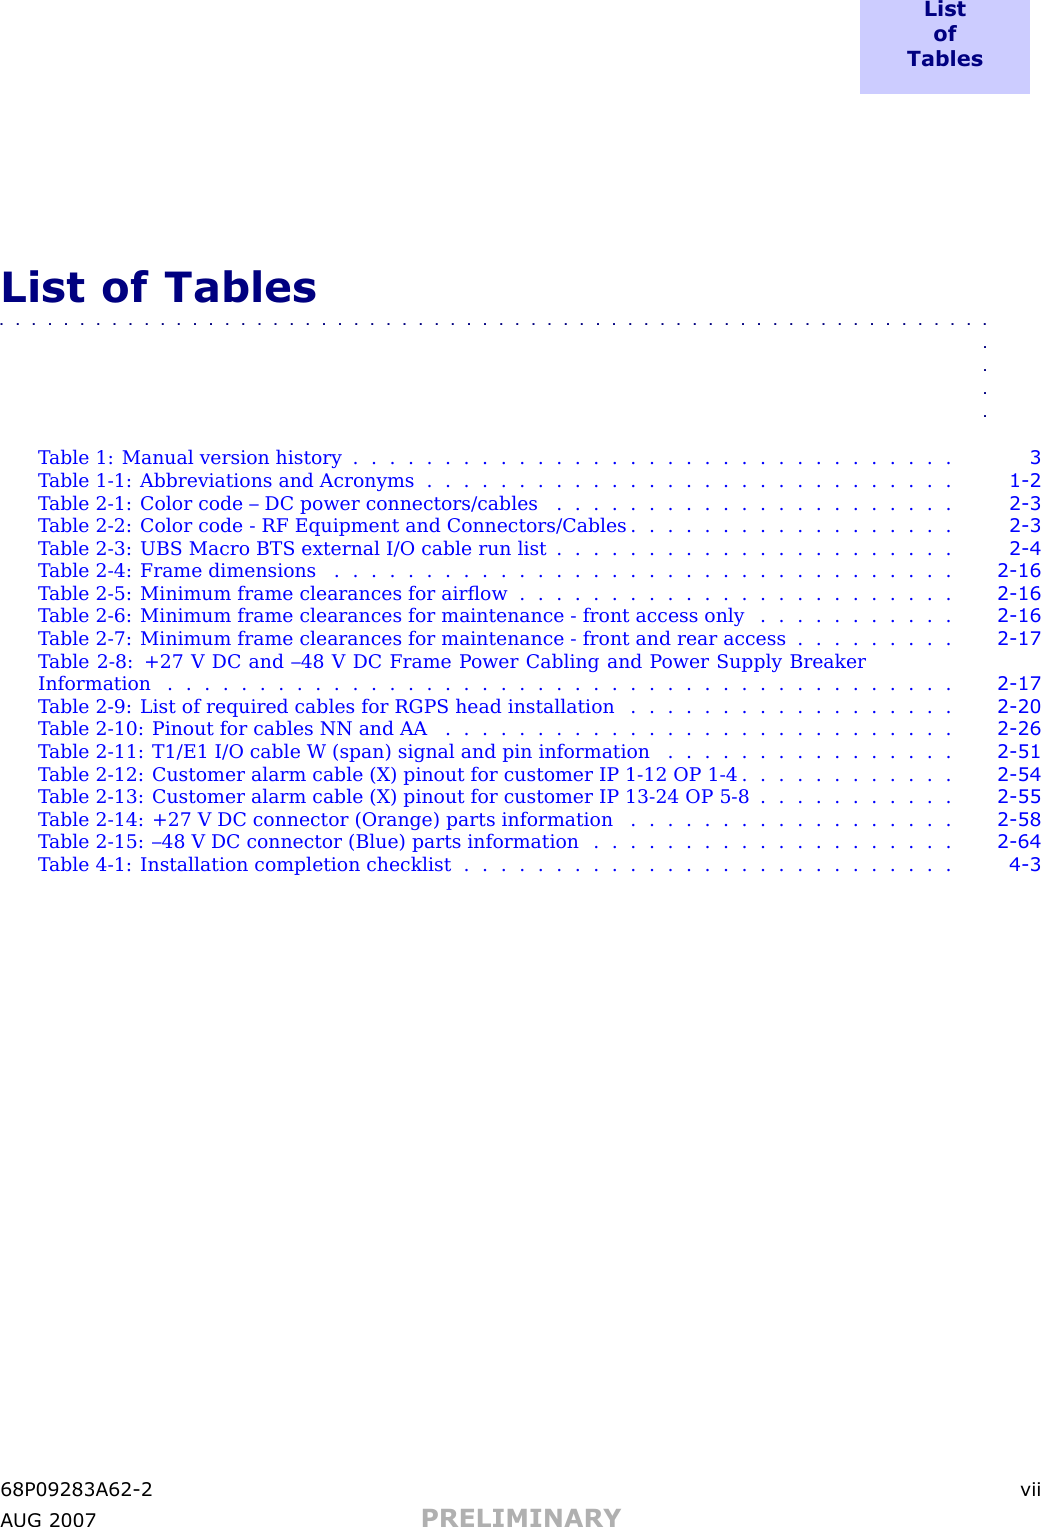 L i s to fT a b l e sList of Tables■■■■■■■■■■■■■■■■■■■■■■■■■■■■■■■■■■■■■■■■■■■■■■■■■■■■■■■■■■■■■■■■■■T able 1: Manual version history . . . . . . . . . . . . . . . . . . . . . . . . . . . . . . . . . 3T able 1 -1: Abbreviations and Acronyms . . . . . . . . . . . . . . . . . . . . . . . . . . . . . 1 - 2T able 2 -1: Color code – DC power connectors/cables . . . . . . . . . . . . . . . . . . . . . . 2 - 3T able 2 -2: Color code - RF Equipment and Connectors/Cables . . . . . . . . . . . . . . . . . . 2 - 3T able 2 -3: UBS Macro BTS external I/O cable run list . . . . . . . . . . . . . . . . . . . . . . 2 - 4T able 2 -4: Frame dimensions . . . . . . . . . . . . . . . . . . . . . . . . . . . . . . . . . . 2 - 16T able 2 -5: Minimum frame clearances for airﬂow . . . . . . . . . . . . . . . . . . . . . . . . 2 - 16T able 2 -6: Minimum frame clearances for maintenance - front access only . . . . . . . . . . . 2 - 16T able 2 -7: Minimum frame clearances for maintenance - front and rear access . . . . . . . . . 2 - 17T able 2 -8: +27 V DC and –48 V DC Frame P ower Cabling and P ower Supply BreakerInformation ........................................... 2 - 17T able 2 -9: List of required cables for RGPS head installation . . . . . . . . . . . . . . . . . . 2 - 20T able 2 -10: Pinout for cables NN and AA . . . . . . . . . . . . . . . . . . . . . . . . . . . . 2 - 26T able 2 -11: T1/E1 I/O cable W (span) signal and pin information . . . . . . . . . . . . . . . . 2 - 51T able 2 -12: Customer alarm cable (X) pinout for customer IP 1 -12 OP 1 -4 . . . . . . . . . . . . 2 - 54T able 2 -13: Customer alarm cable (X) pinout for customer IP 13 -24 OP 5 -8 . . . . . . . . . . . 2 - 55T able 2 -14: +27 V DC connector (Orange) parts information . . . . . . . . . . . . . . . . . . 2 - 58T able 2 -15: –48 V DC connector (Blue) parts information . . . . . . . . . . . . . . . . . . . . 2 - 64T able 4 -1: Installation completion checklist . . . . . . . . . . . . . . . . . . . . . . . . . . . 4 - 368P09283A62 -2 viiA UG 2007 PRELIMINARY